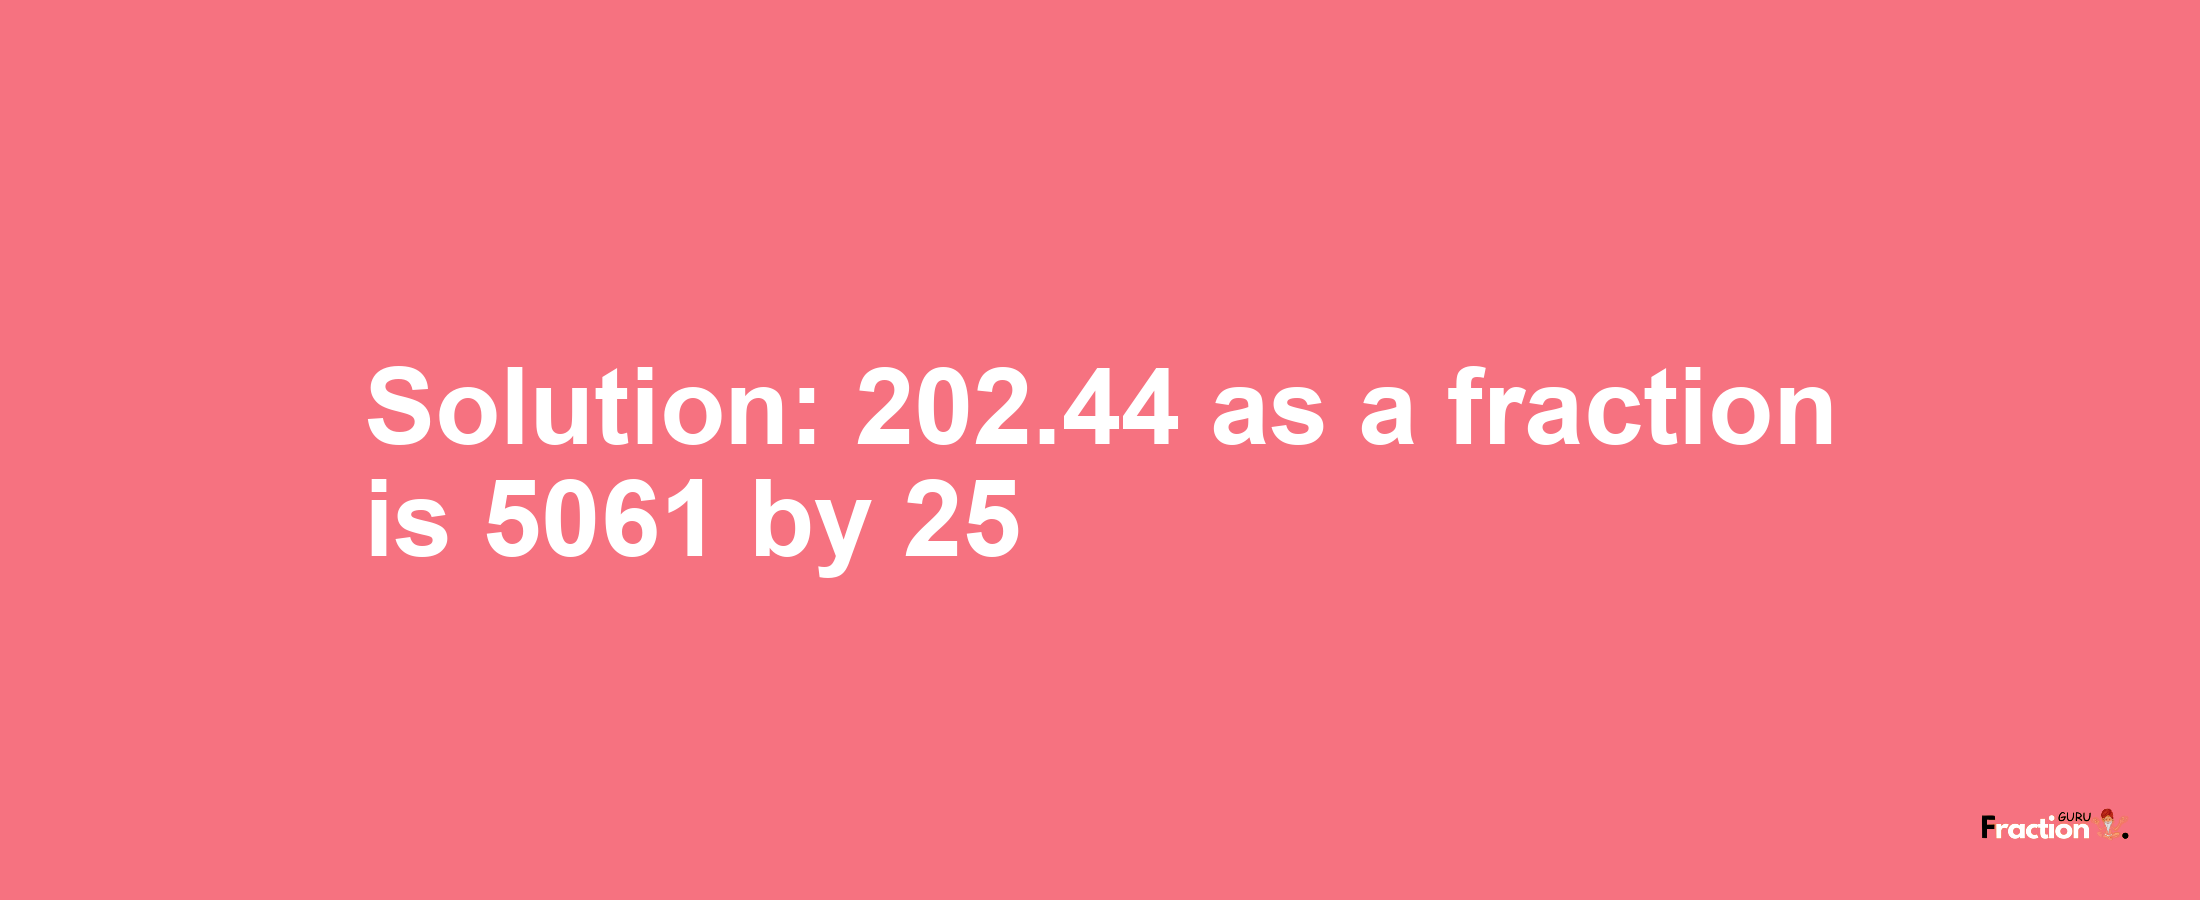 Solution:202.44 as a fraction is 5061/25